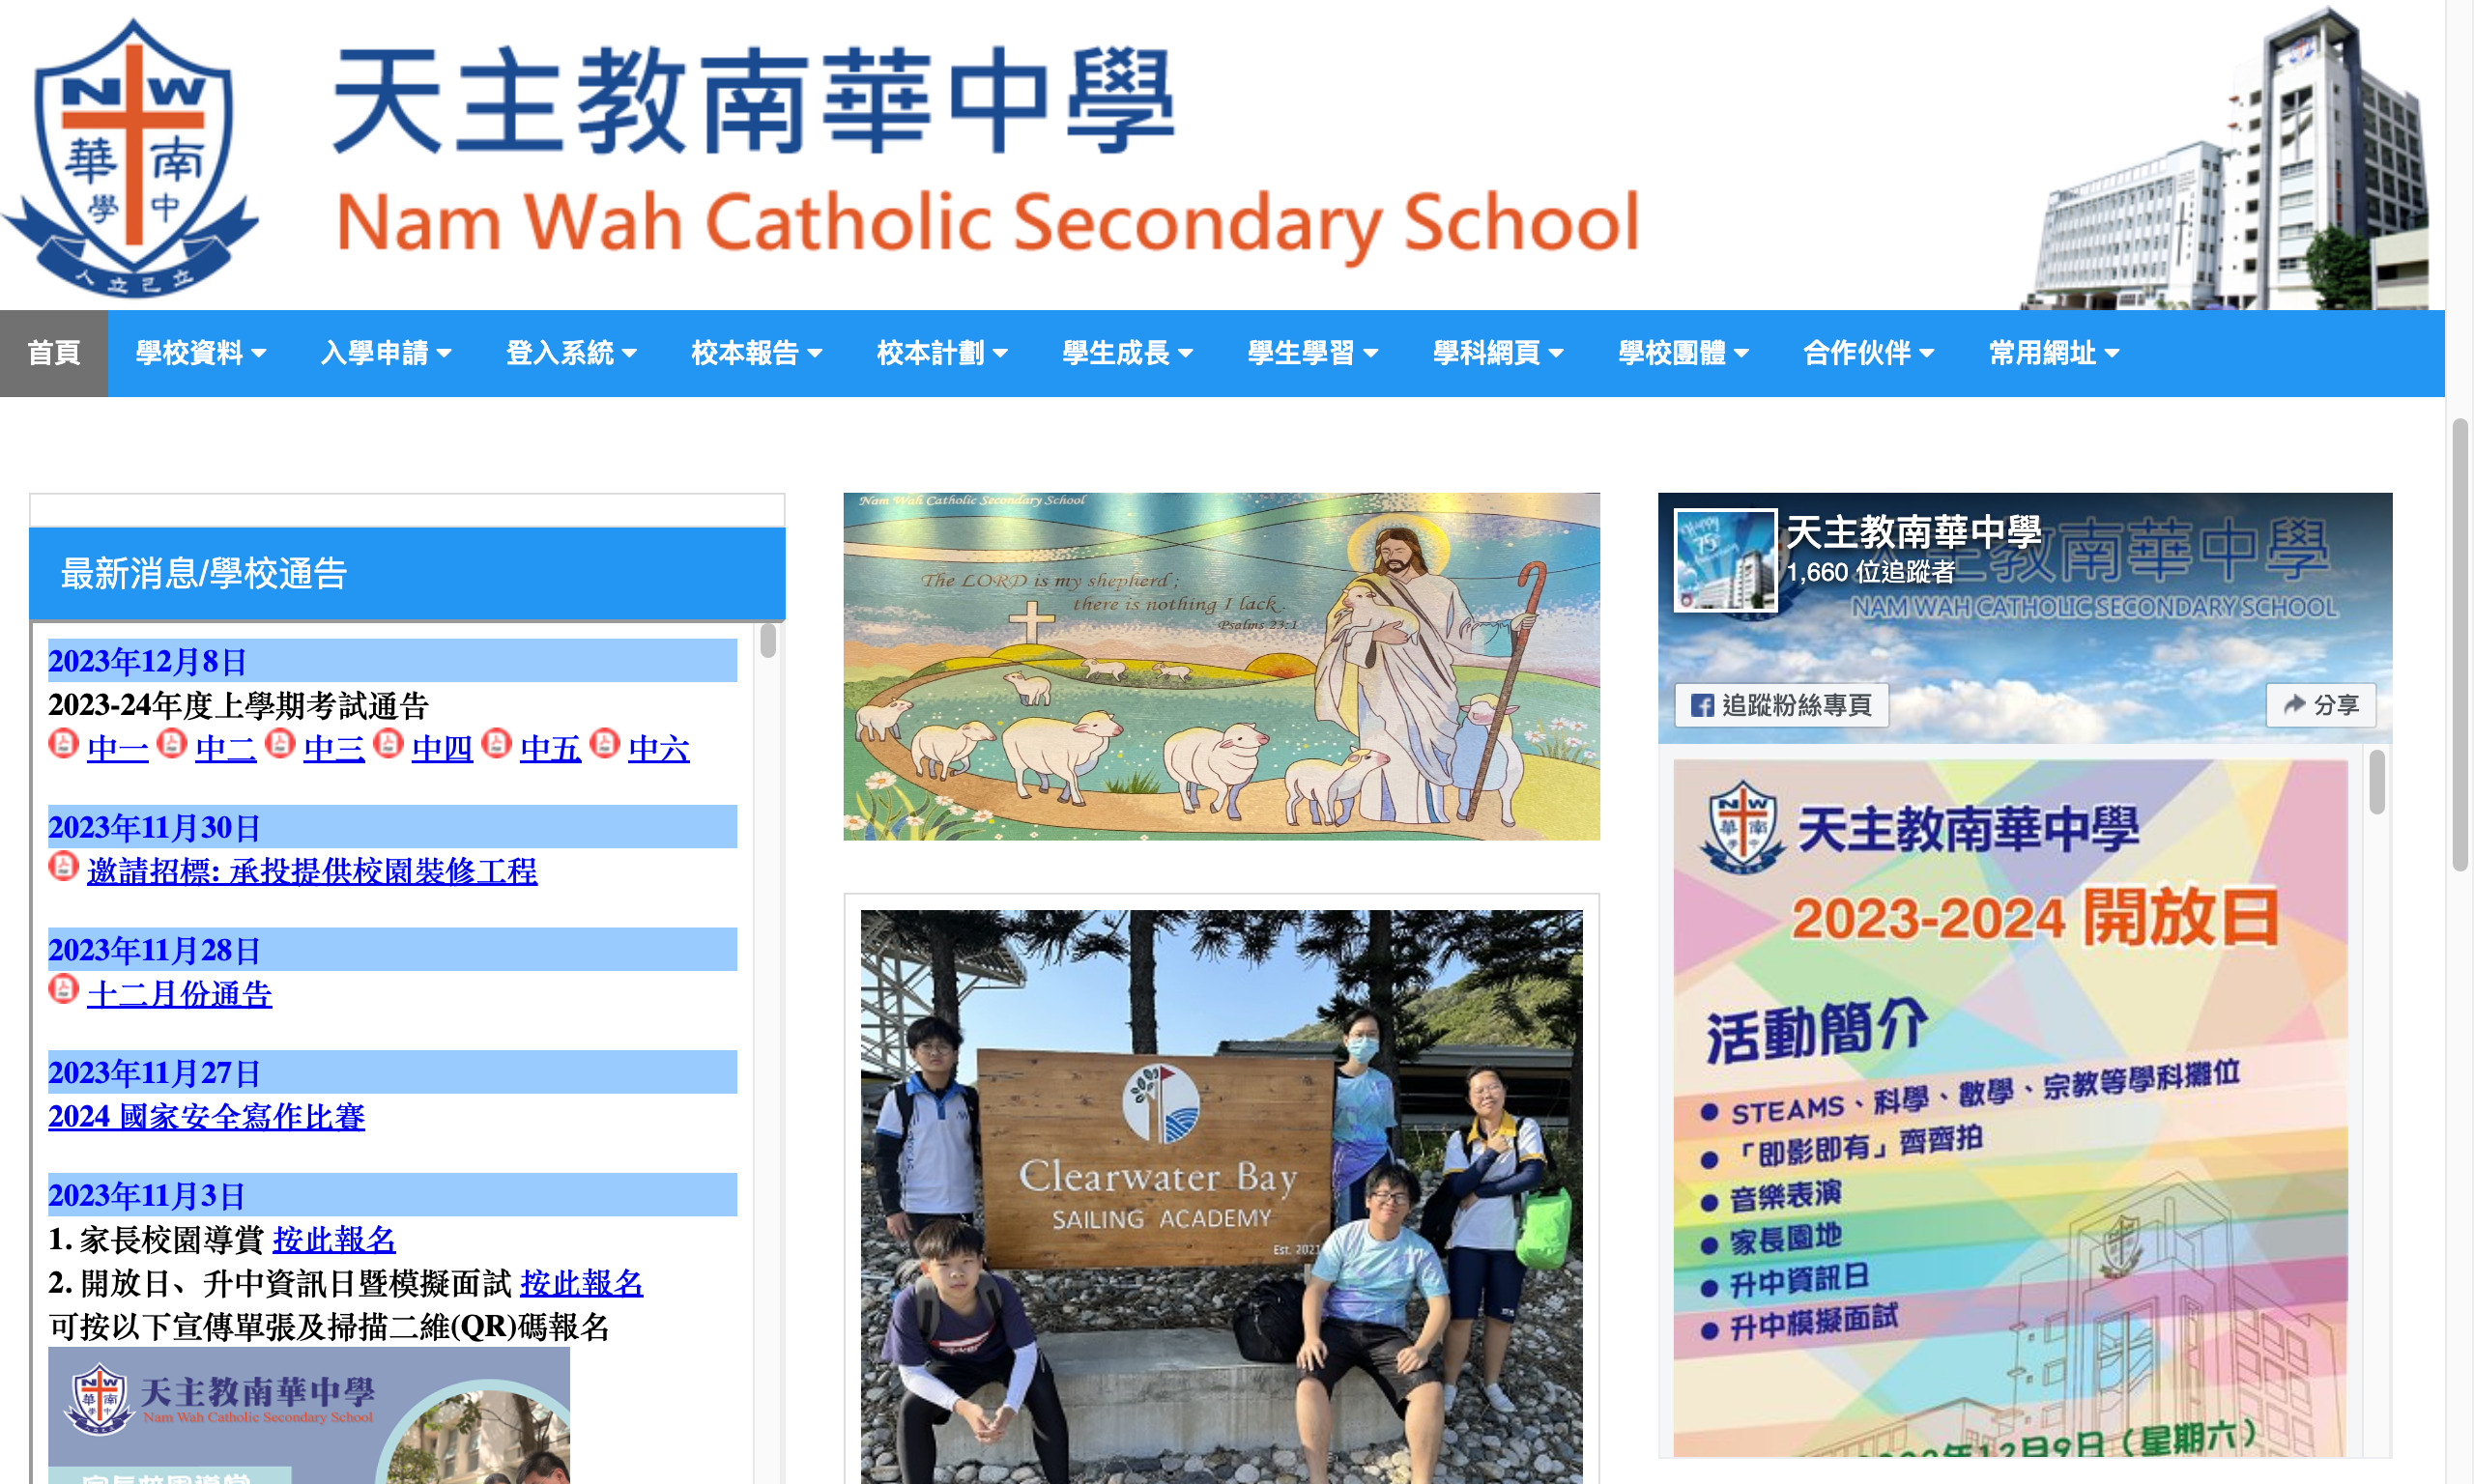 Screenshot of the Home Page of Nam Wah Catholic Secondary School